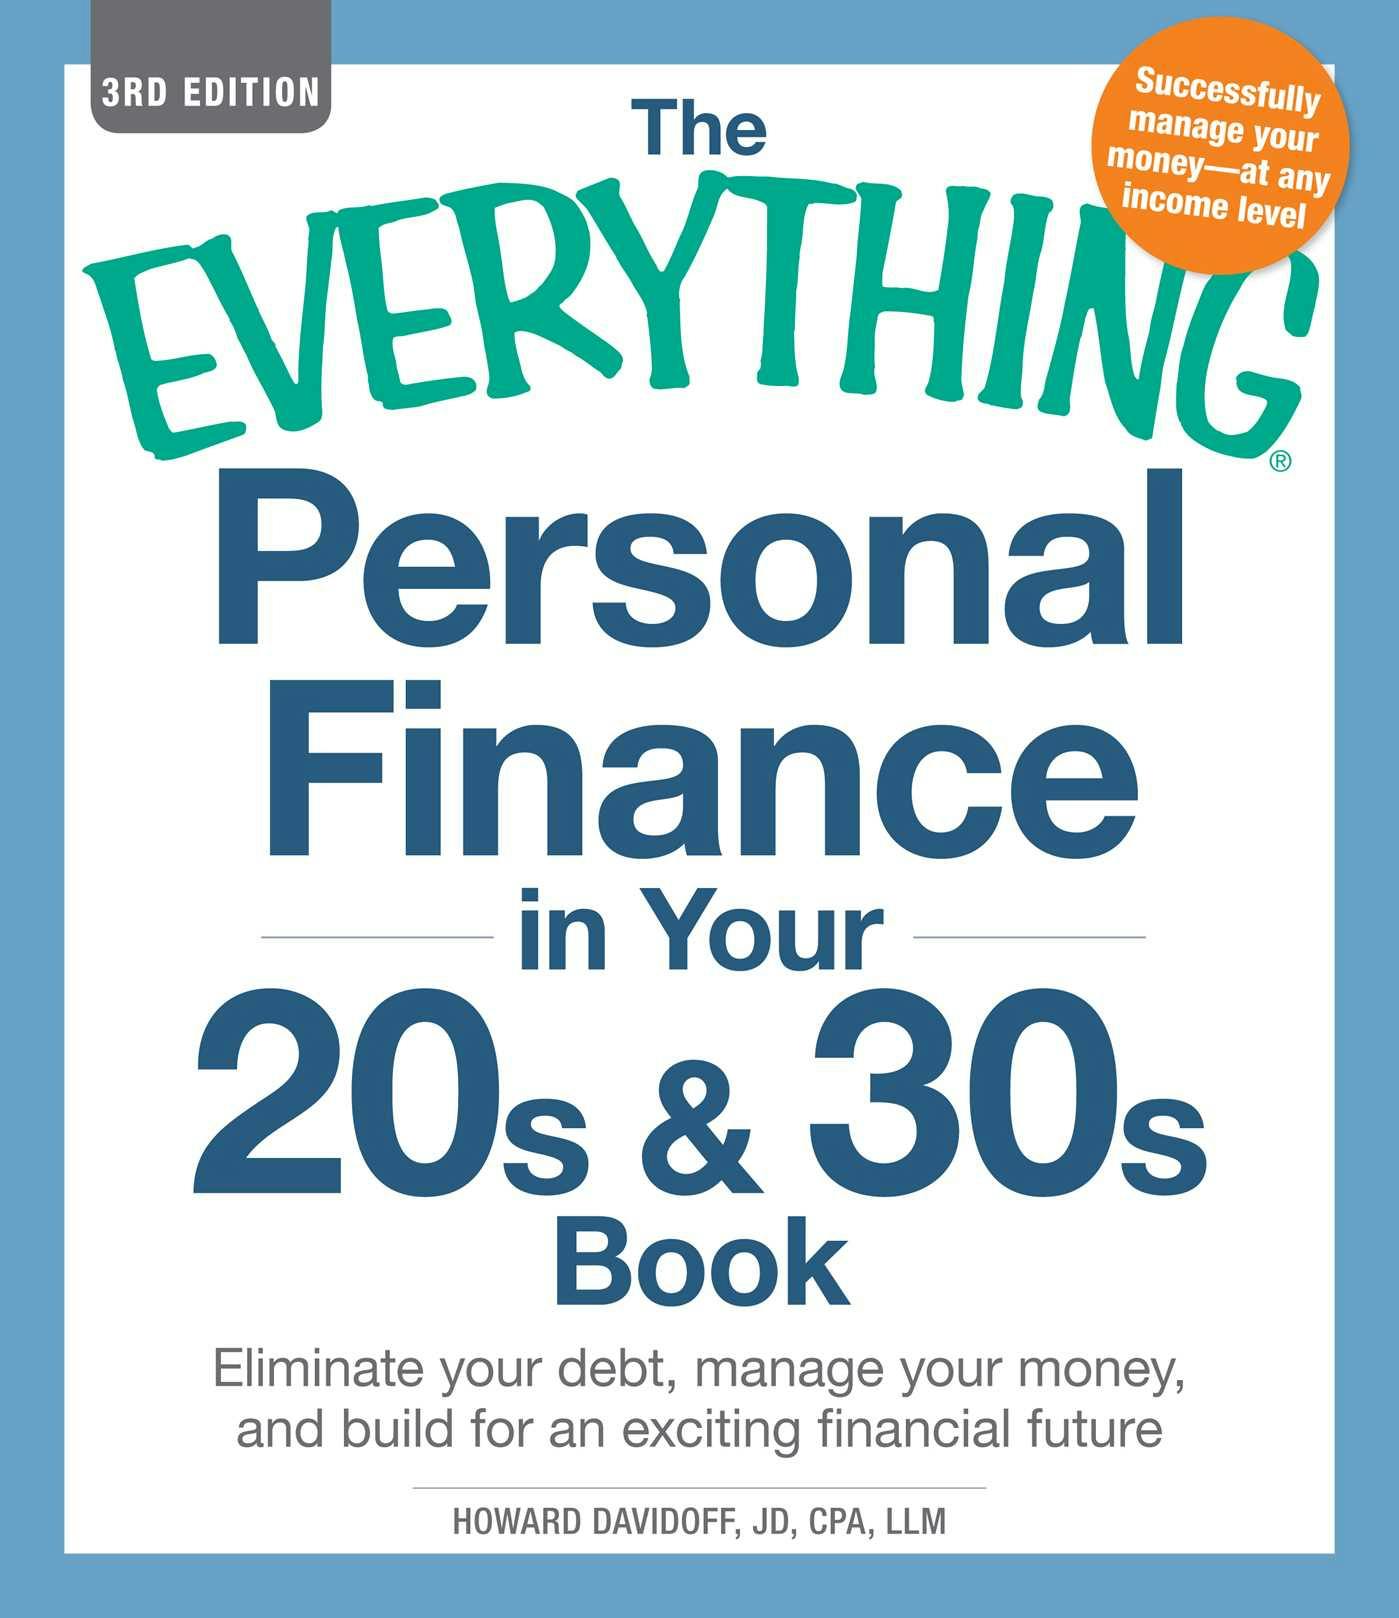 The Everything Personal Finance in Your 20s & 30s Book: Eliminate your debt, manage your money, and build for an exciting financial future - Howard Davidoff